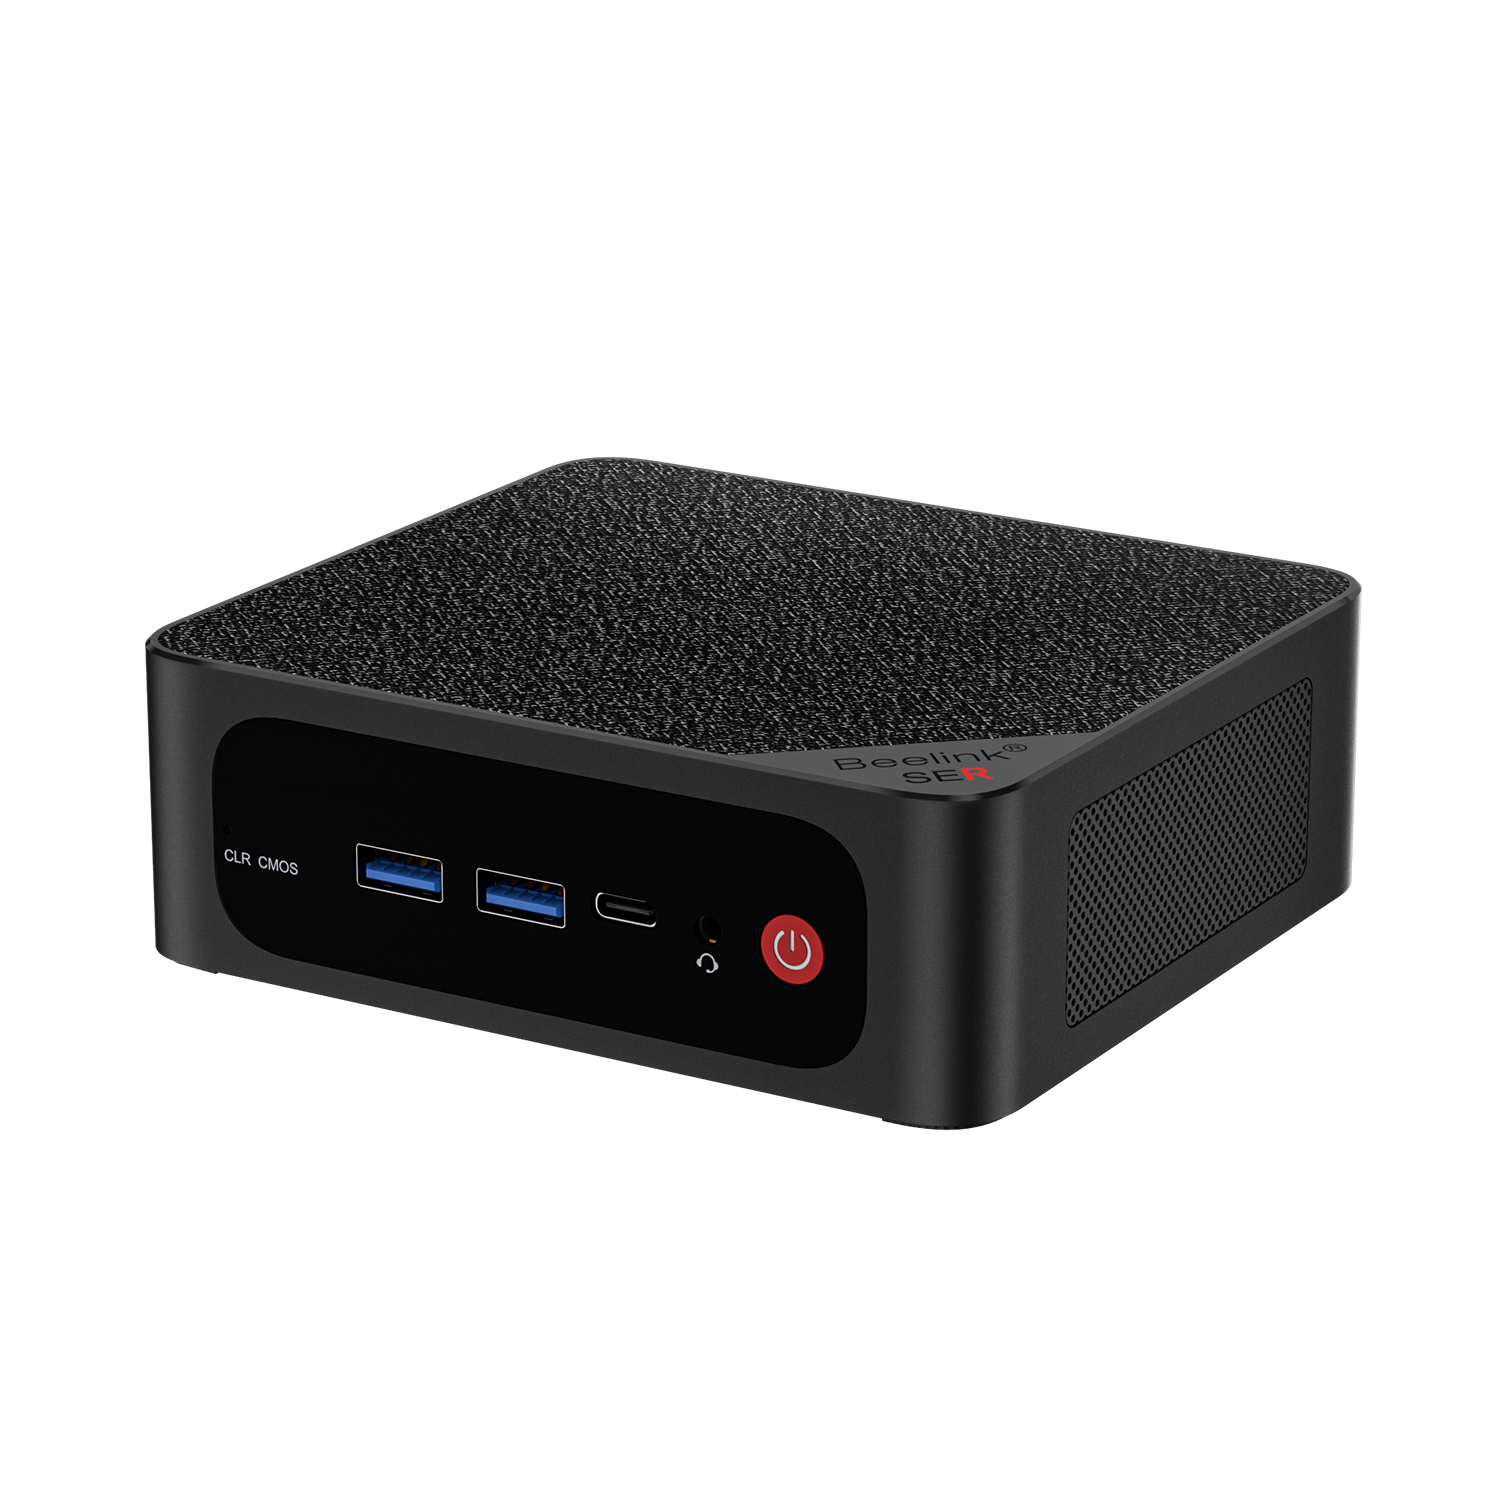 Beelink Mini PC SER5 MAX equipped with AMD Ryzen 7 5800H(up to 4.2GHz)  6C/12T, pre-in Win 11,16GB or 32GB DDR4 RAM, 500GB or 1TB NVME SSD,4K  output of Triple Display via HDM